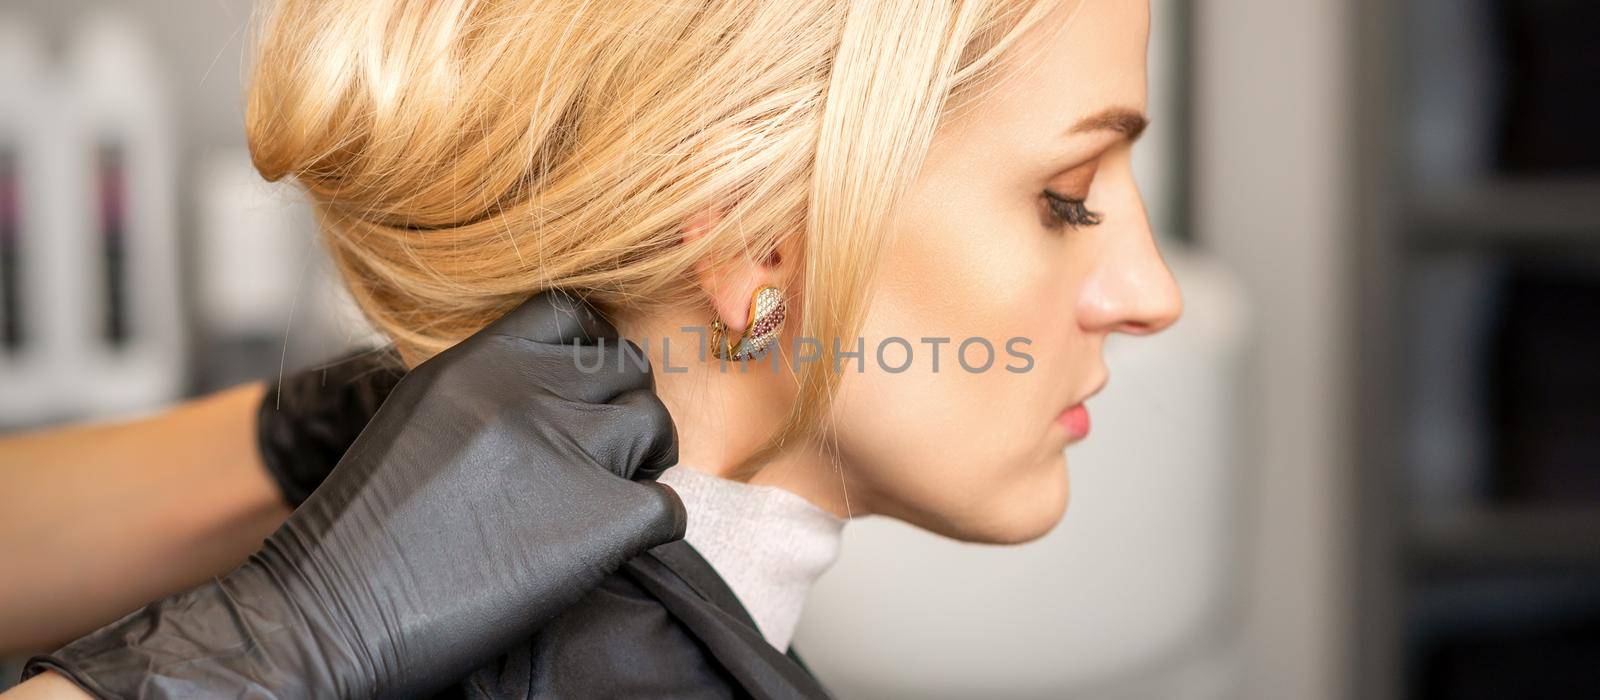 Hands of hairdresser making preparation before giving haircut to young blond woman at beauty salon